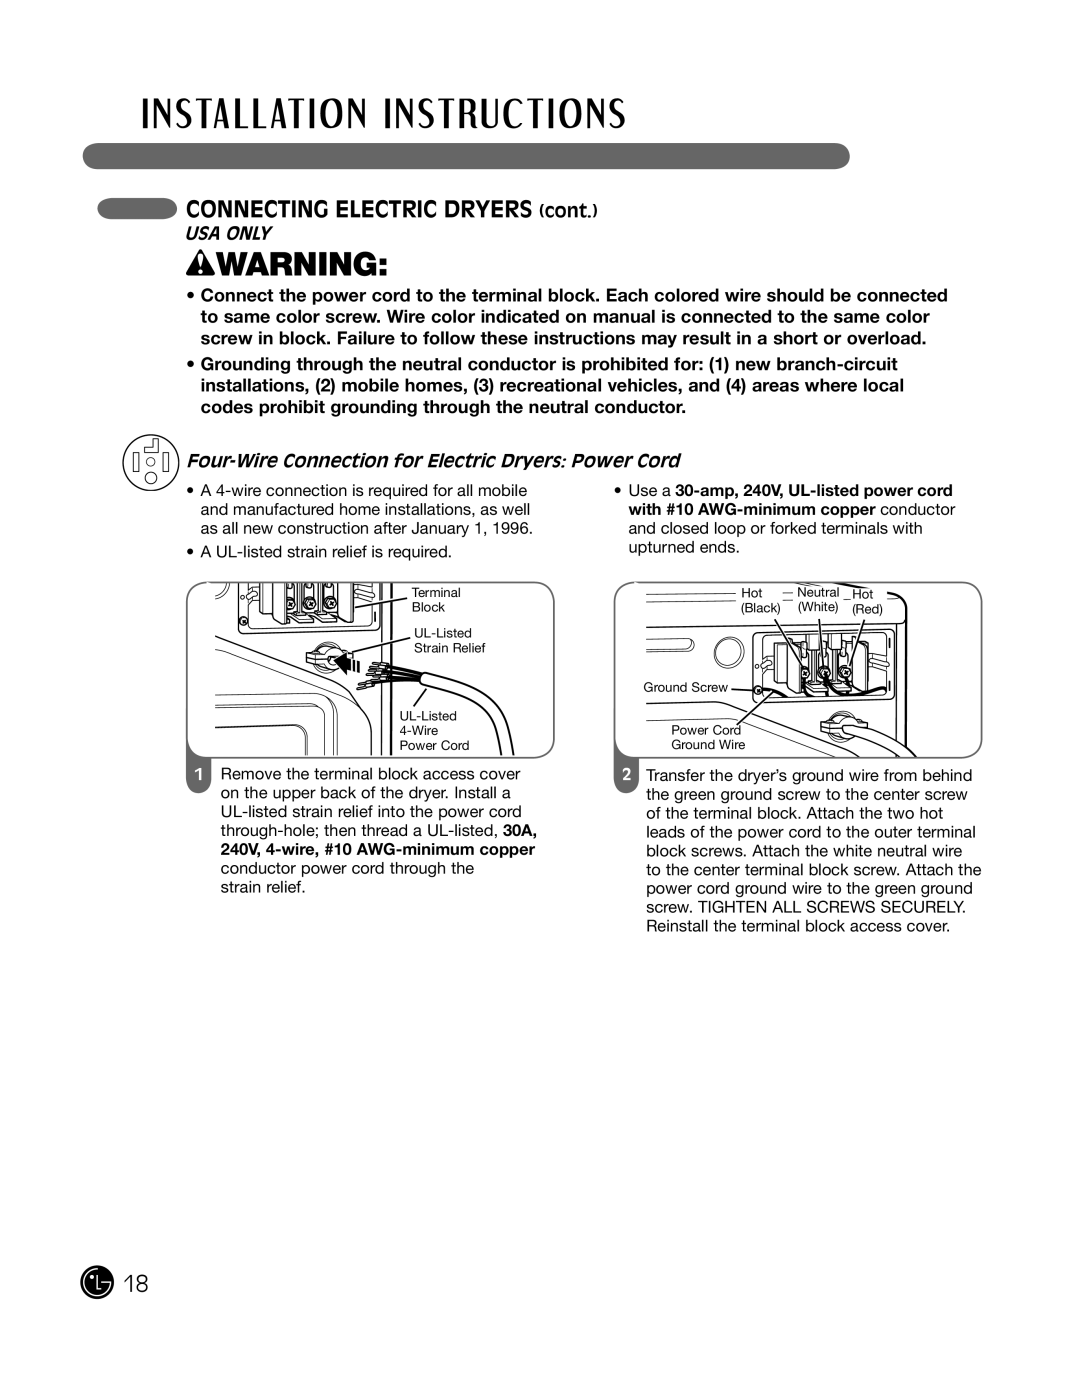 LG Electronics D2102R manual CONNECTING ELECTRIC DRYERS cont, Usa Only, Four-Wire Connection for Electric Dryers Power Cord 